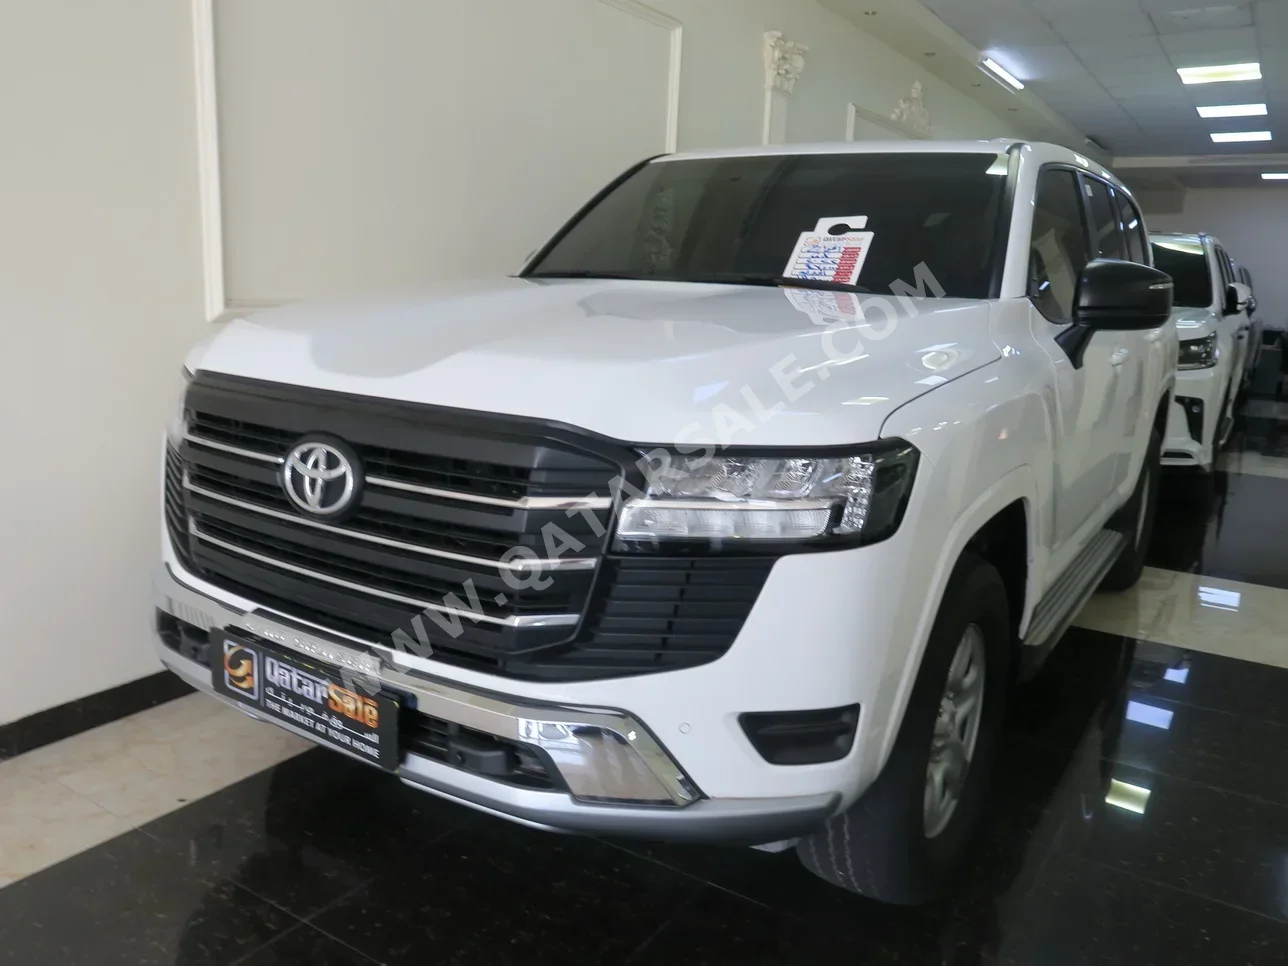 Toyota  Land Cruiser  GX  2022  Automatic  47,000 Km  6 Cylinder  Four Wheel Drive (4WD)  SUV  White  With Warranty